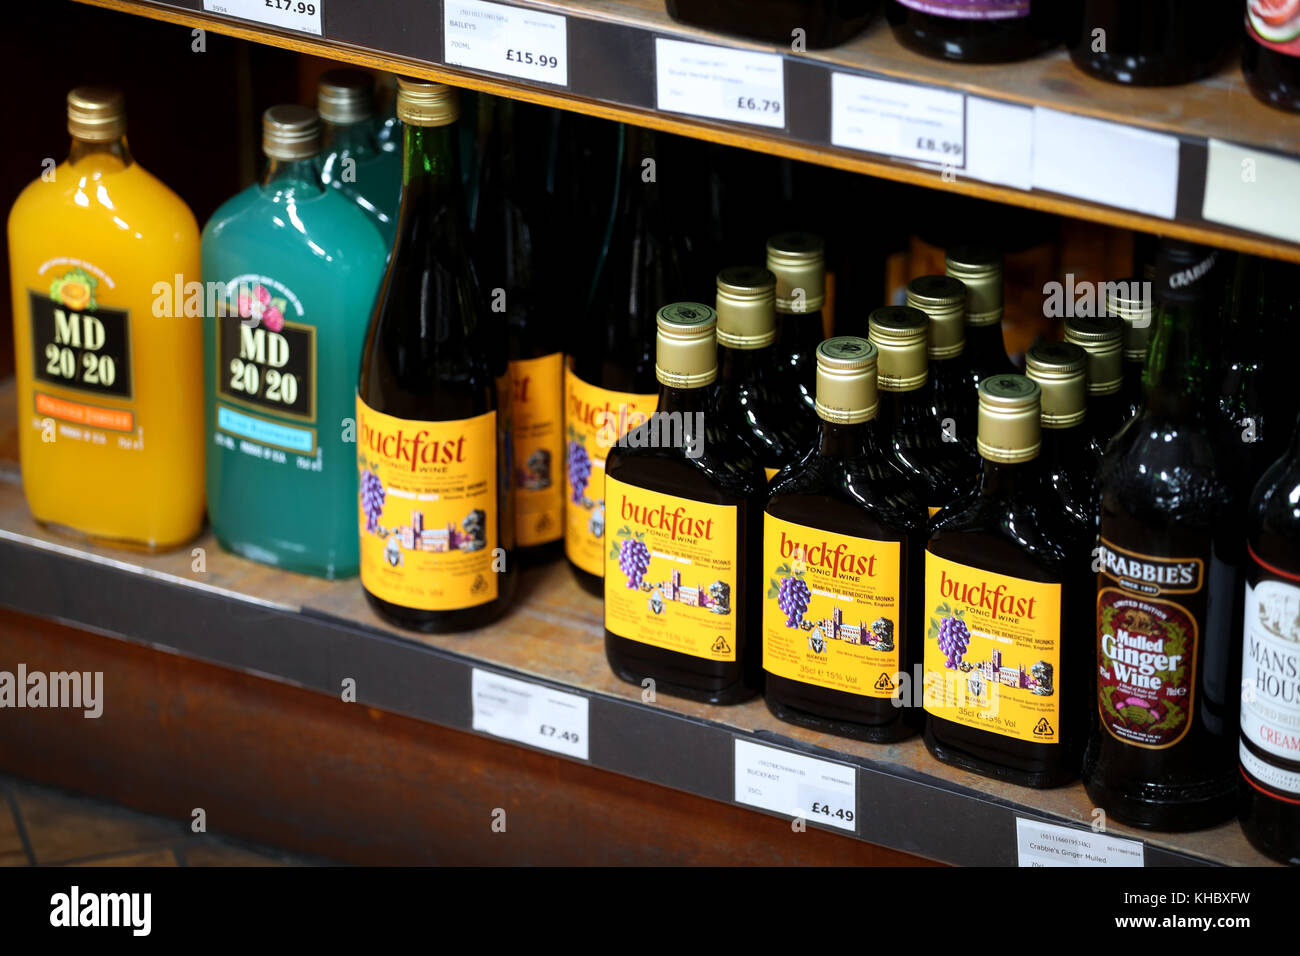 Alcohol for sale in an Edinburgh off-licence shop as Scotland will become the first country in the world to introduce minimum unit pricing for alcohol. Stock Photo